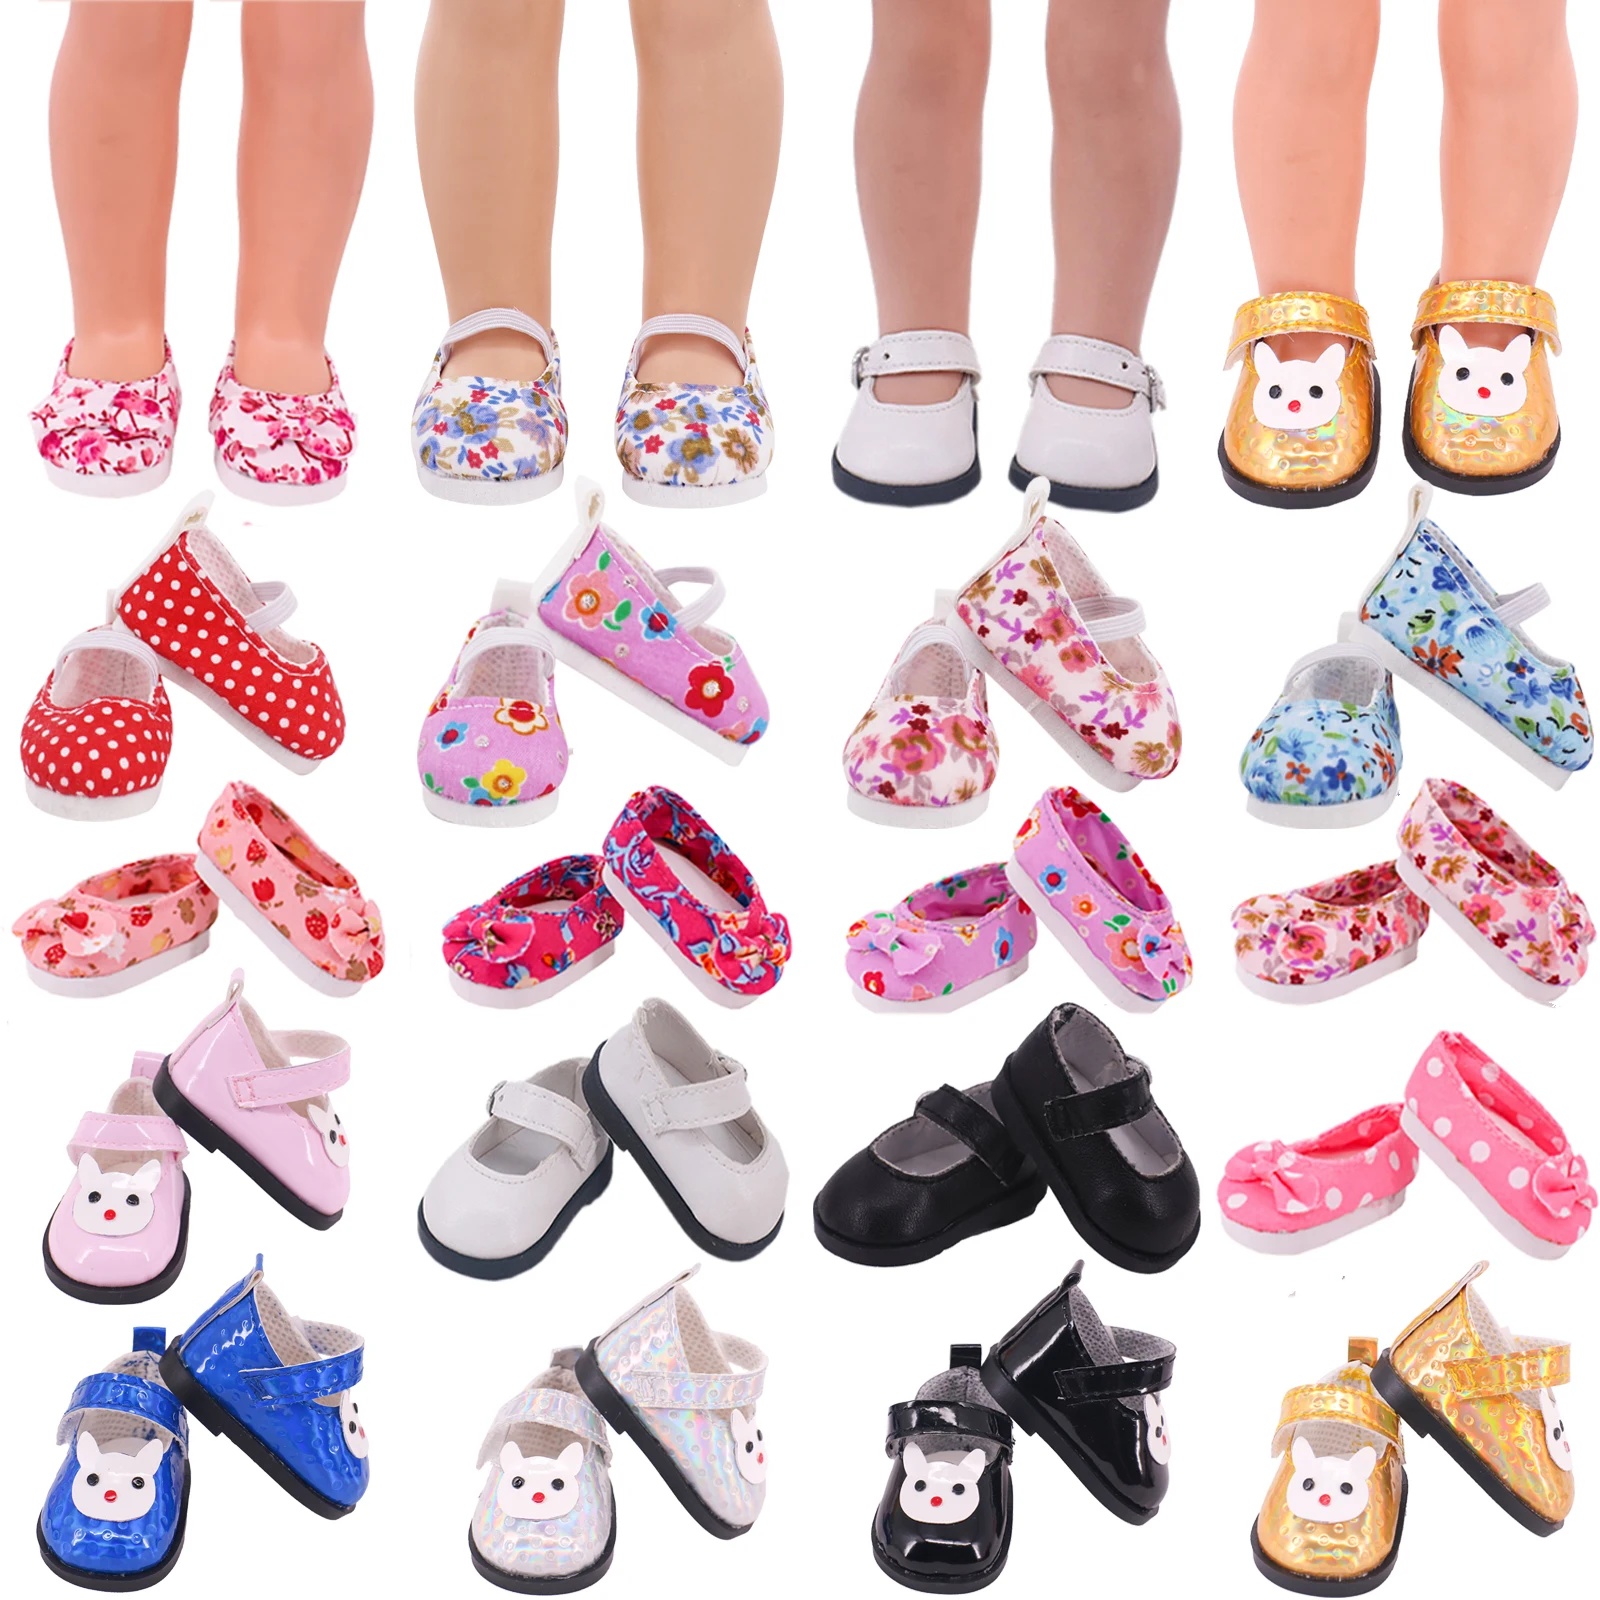 Cute 5Cm Doll Shoes Paola Reina Wellie Wisher Floral&Pu Shoes For 14.5 Inch Doll&EXO&Blythe Doll Accessories Girl DIY Toys 11 styles skirt doll clothes accessories 5 cm doll shoes for 14 5 inch wellie wisher